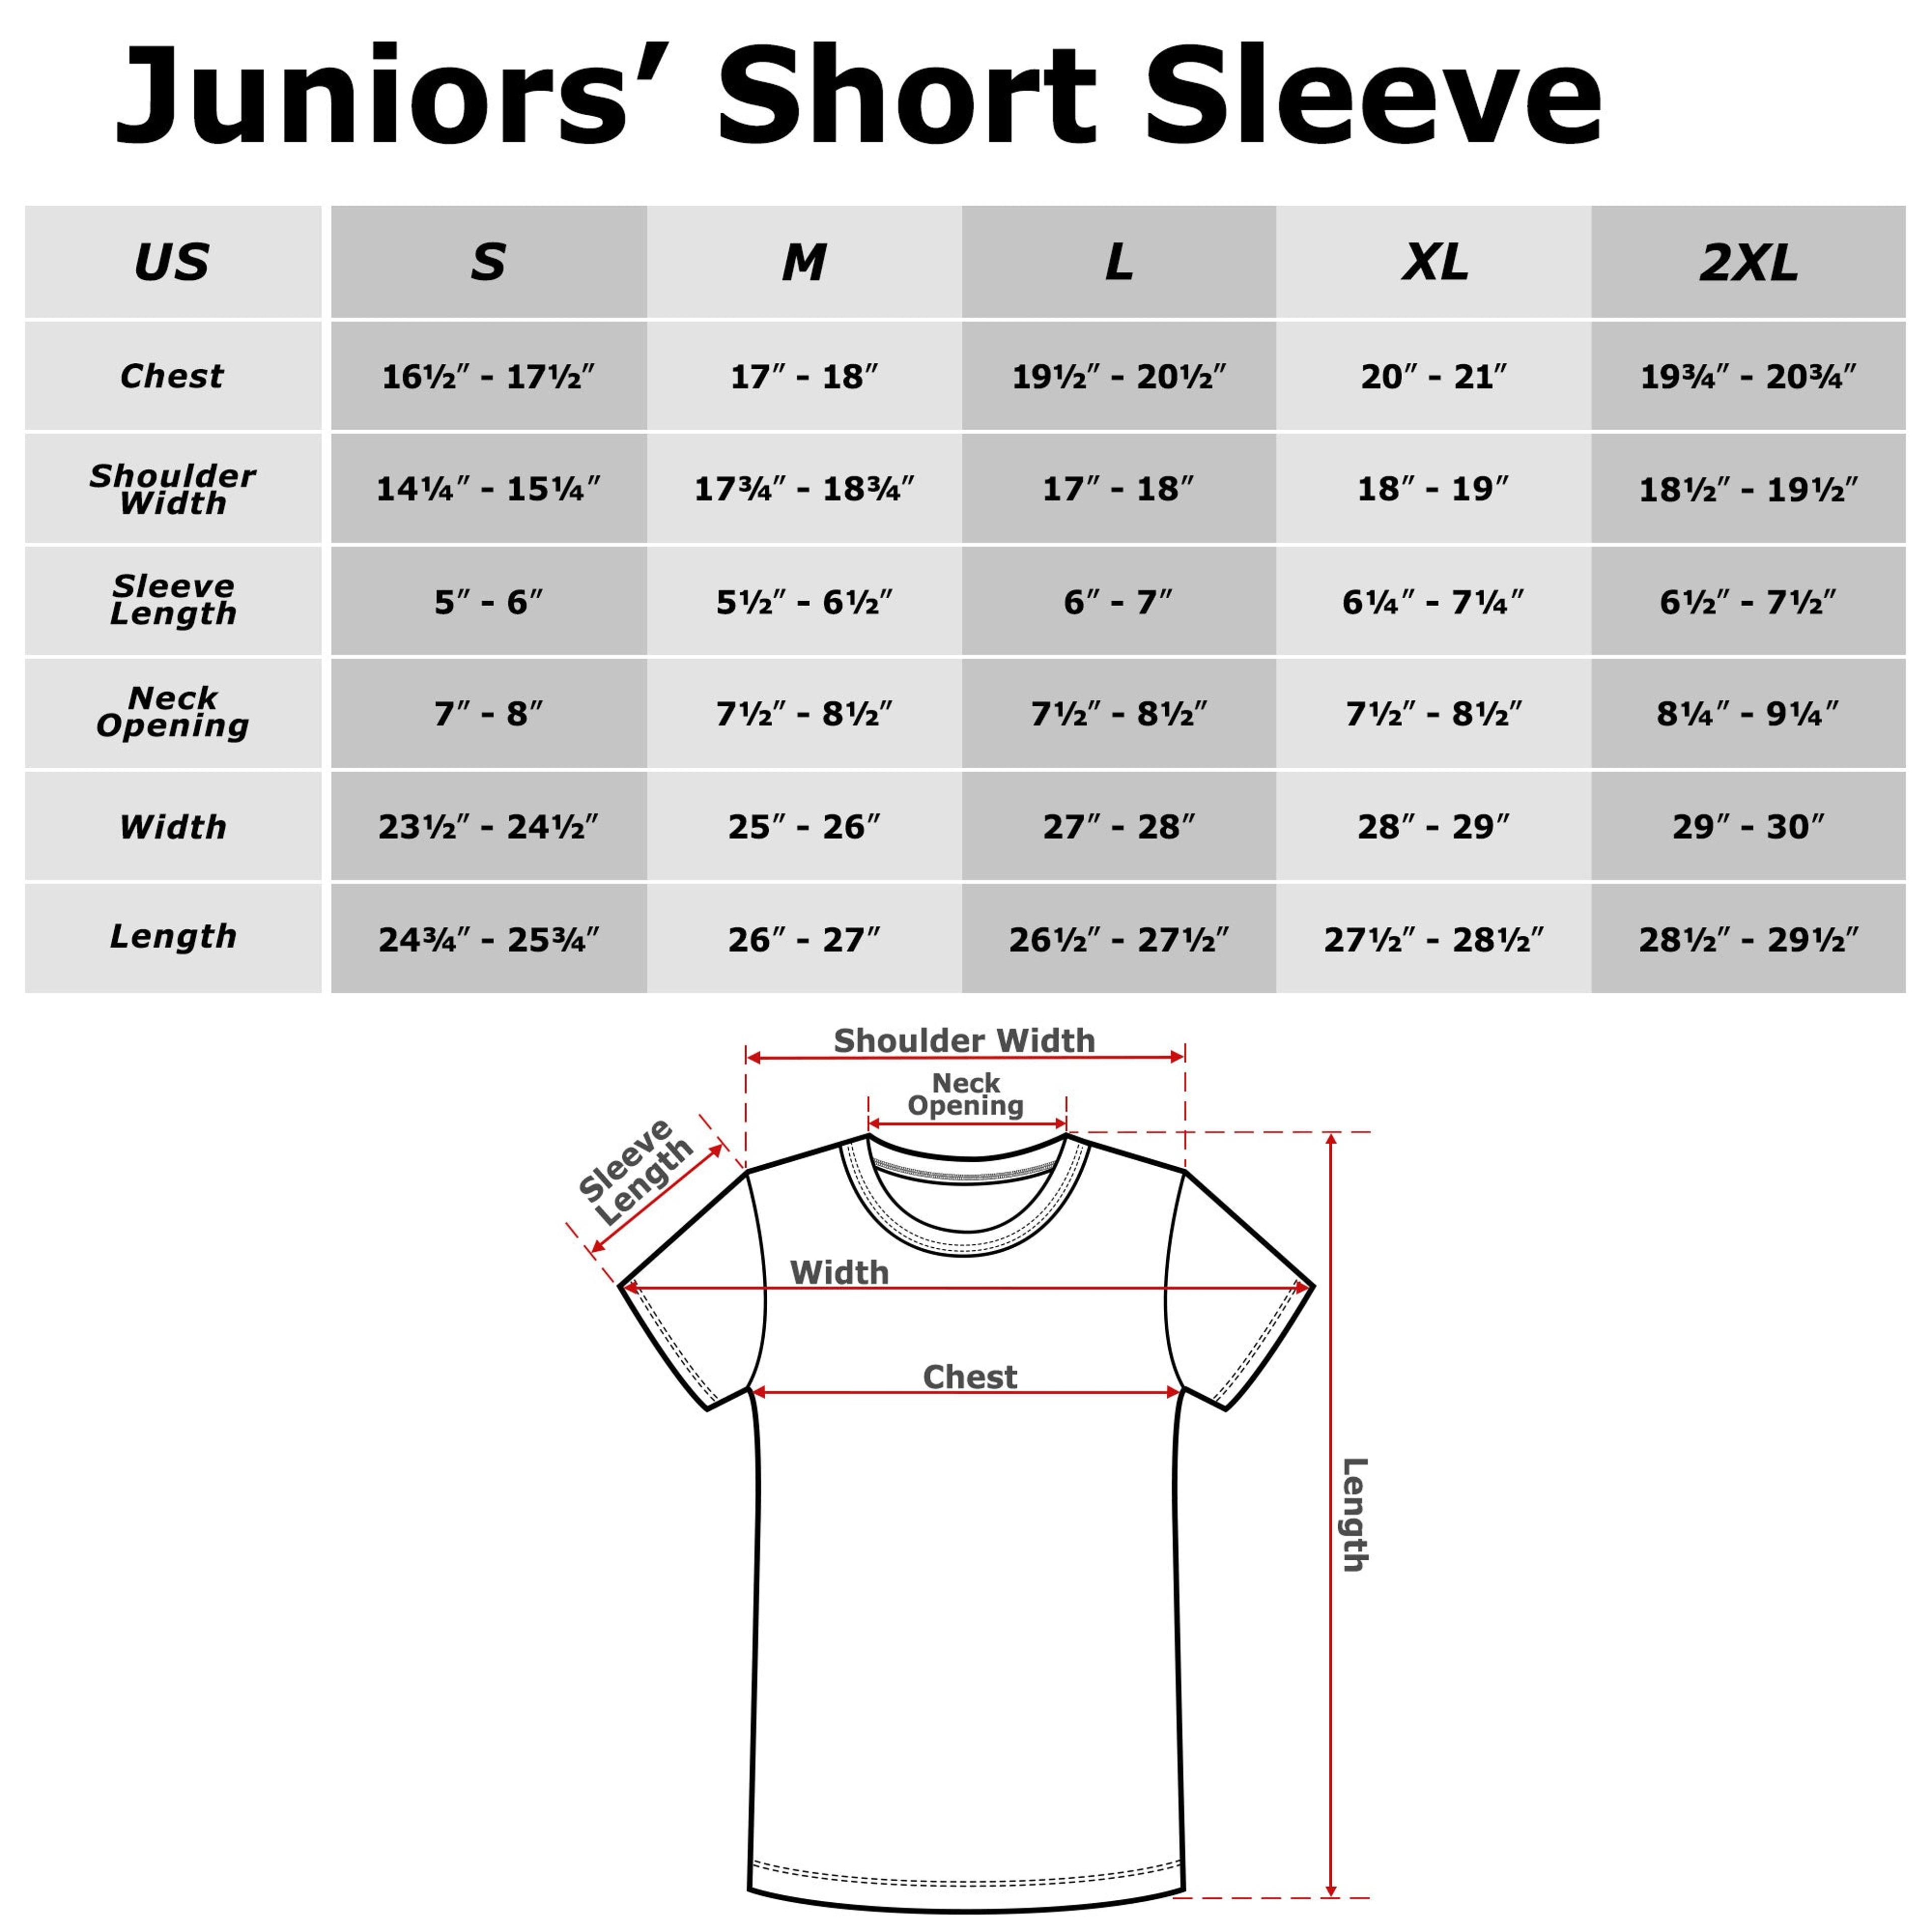 Alternate View 2 of Junior's CHIN UP Fitness Workout T-Shirt